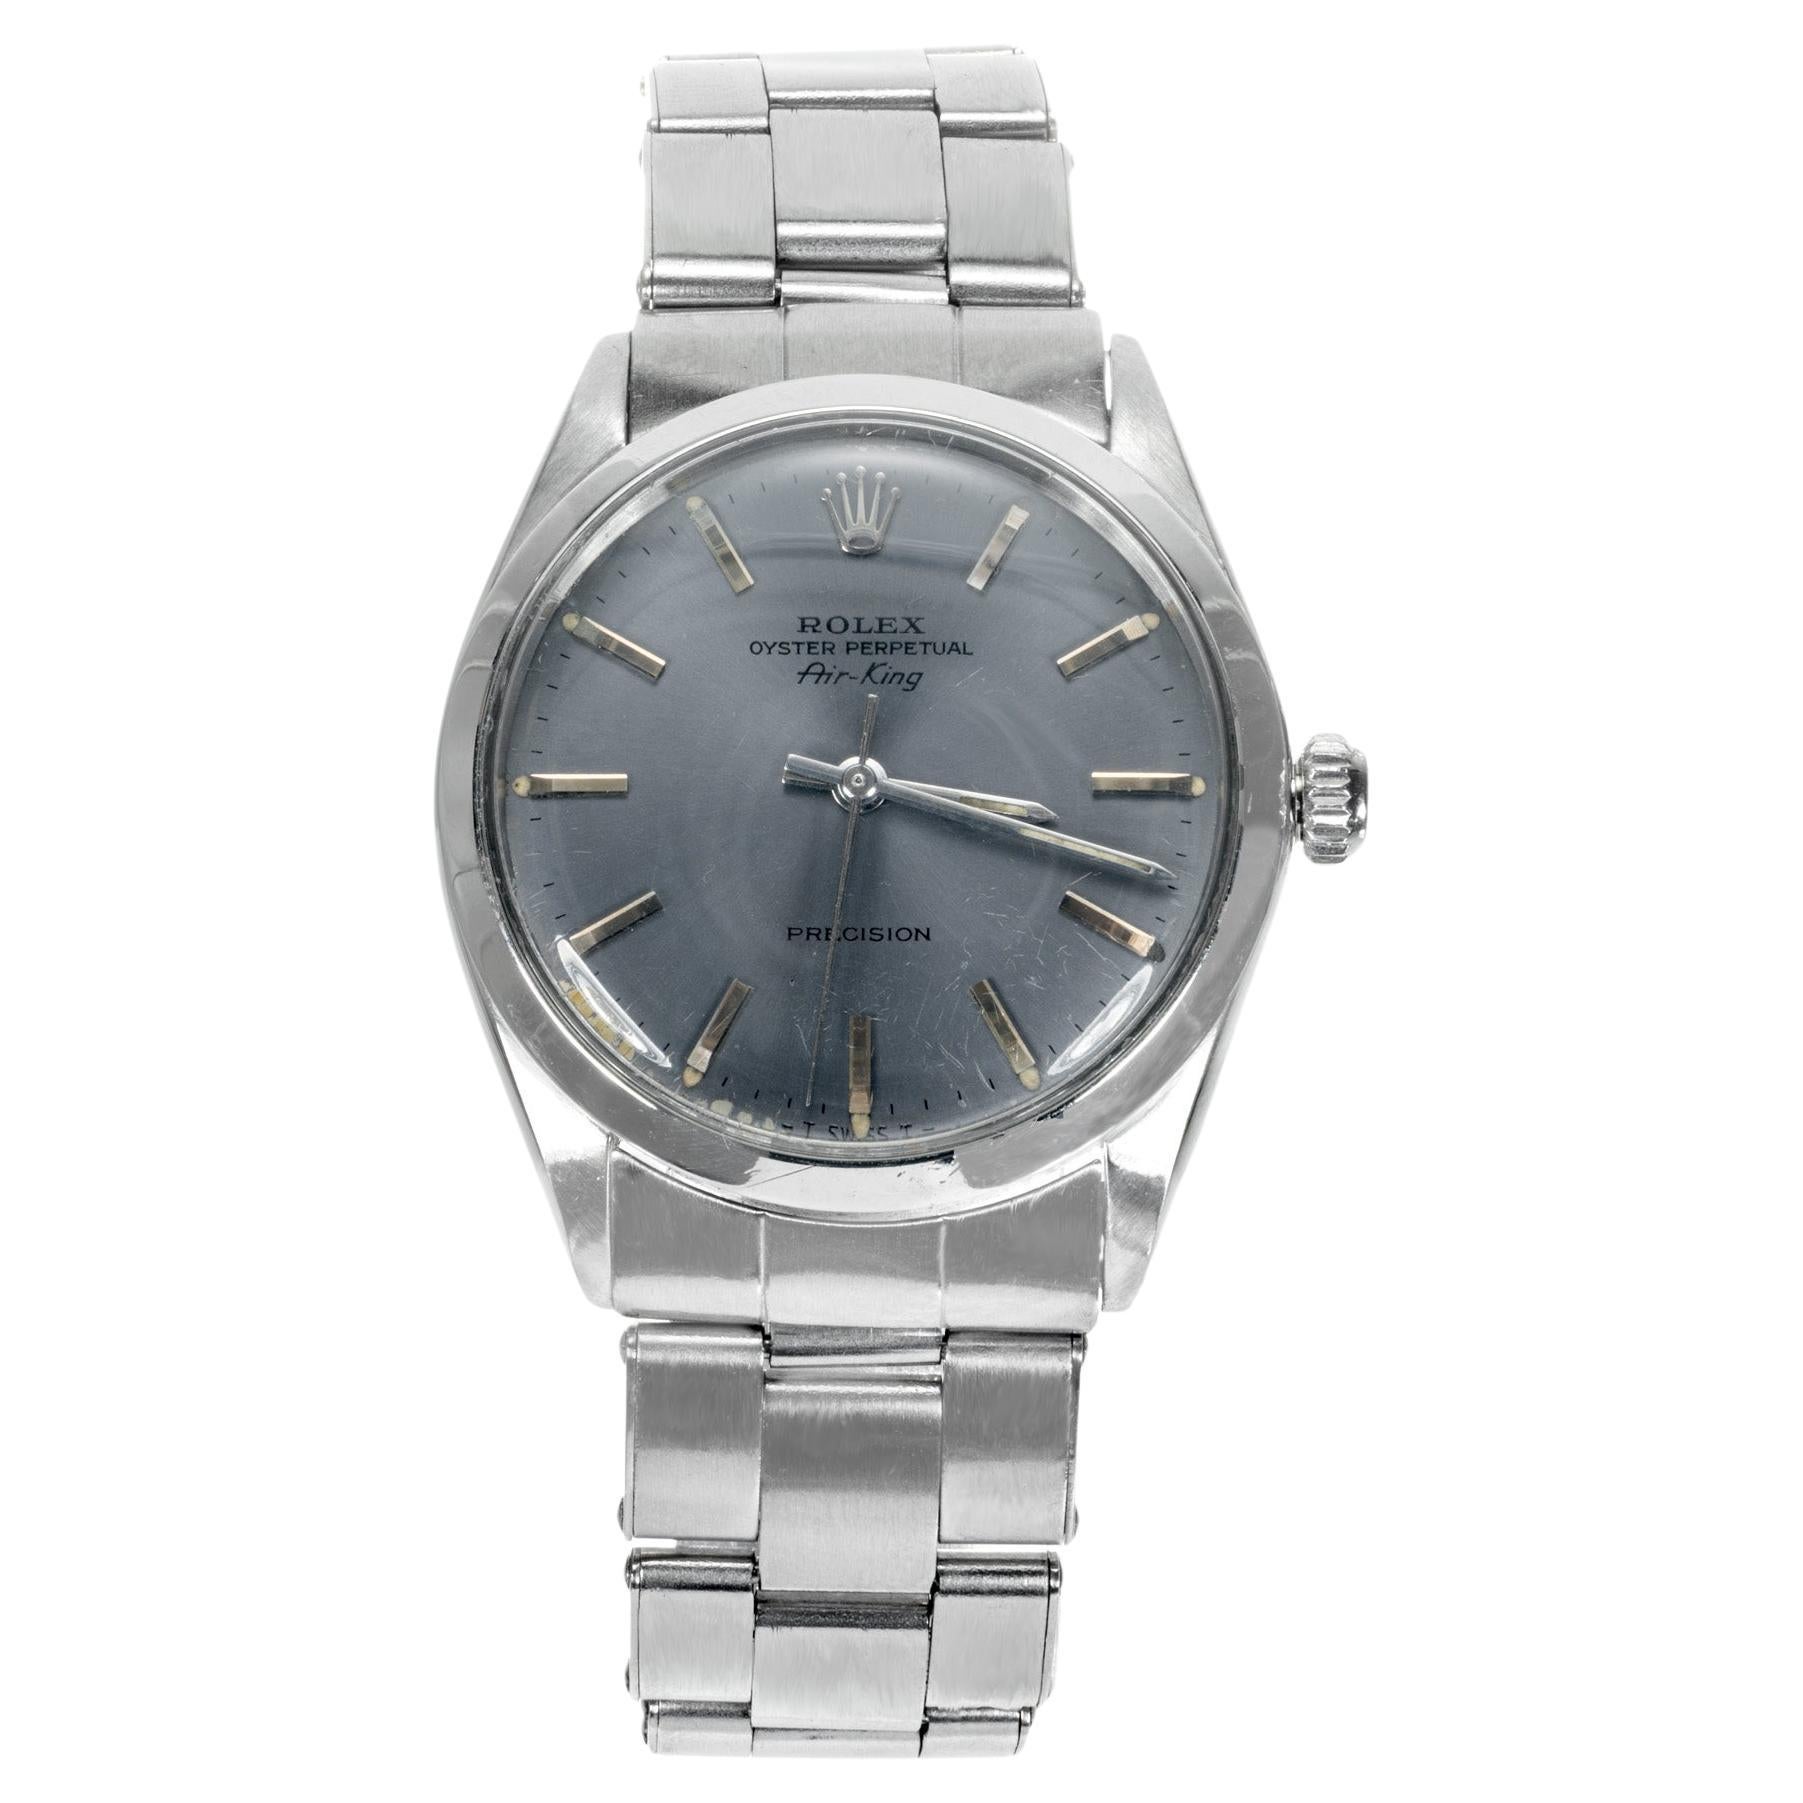 Rolex Stainless Steel Air King 5500 Men's Wristwatch For Sale